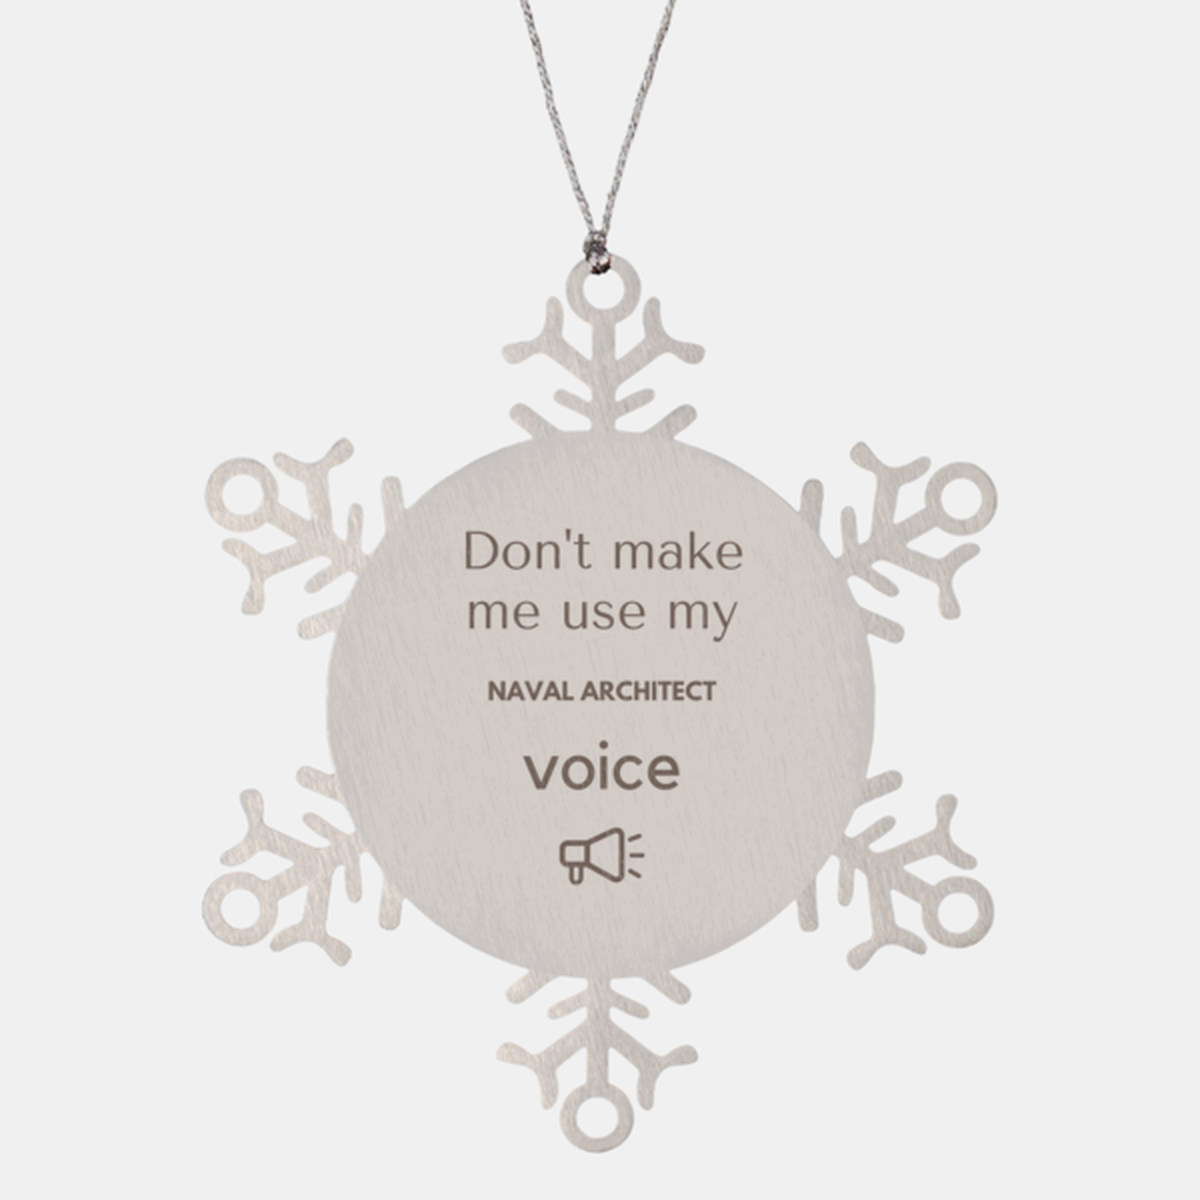 Don't make me use my Naval Architect voice, Sarcasm Naval Architect Ornament Gifts, Christmas Naval Architect Snowflake Ornament Unique Gifts For Naval Architect Coworkers, Men, Women, Colleague, Friends